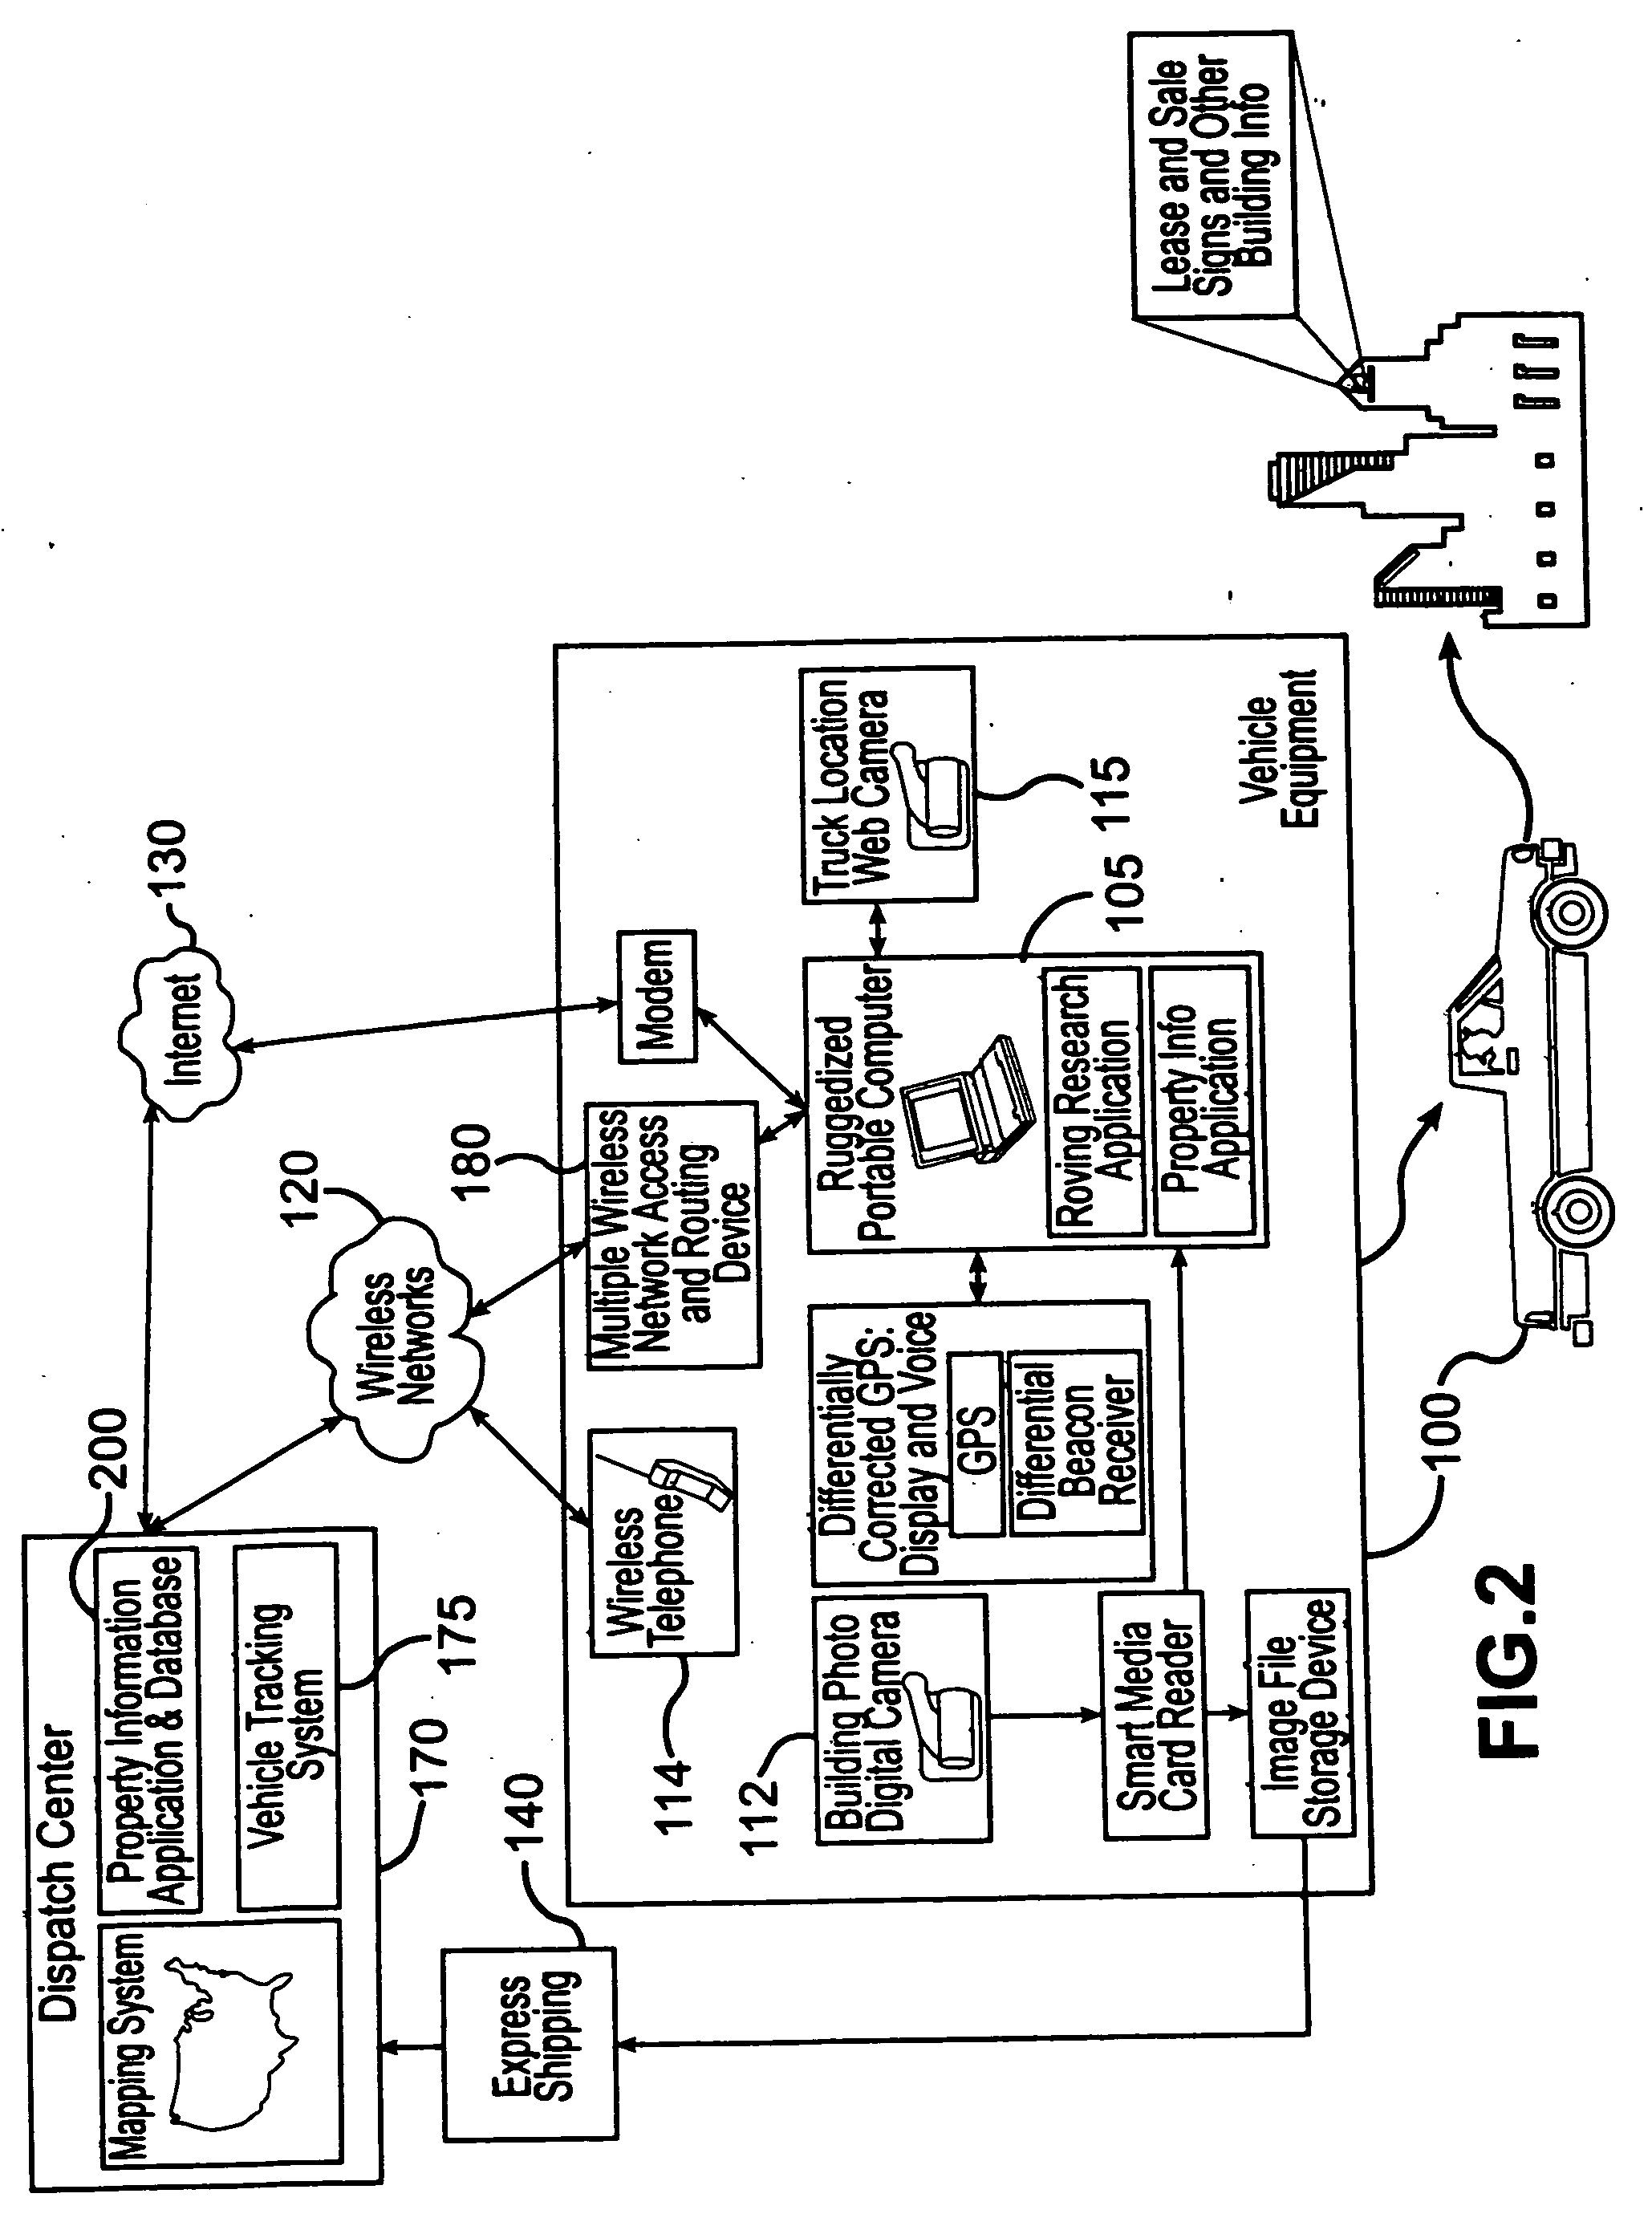 System and method for associating aerial images, map features, and information